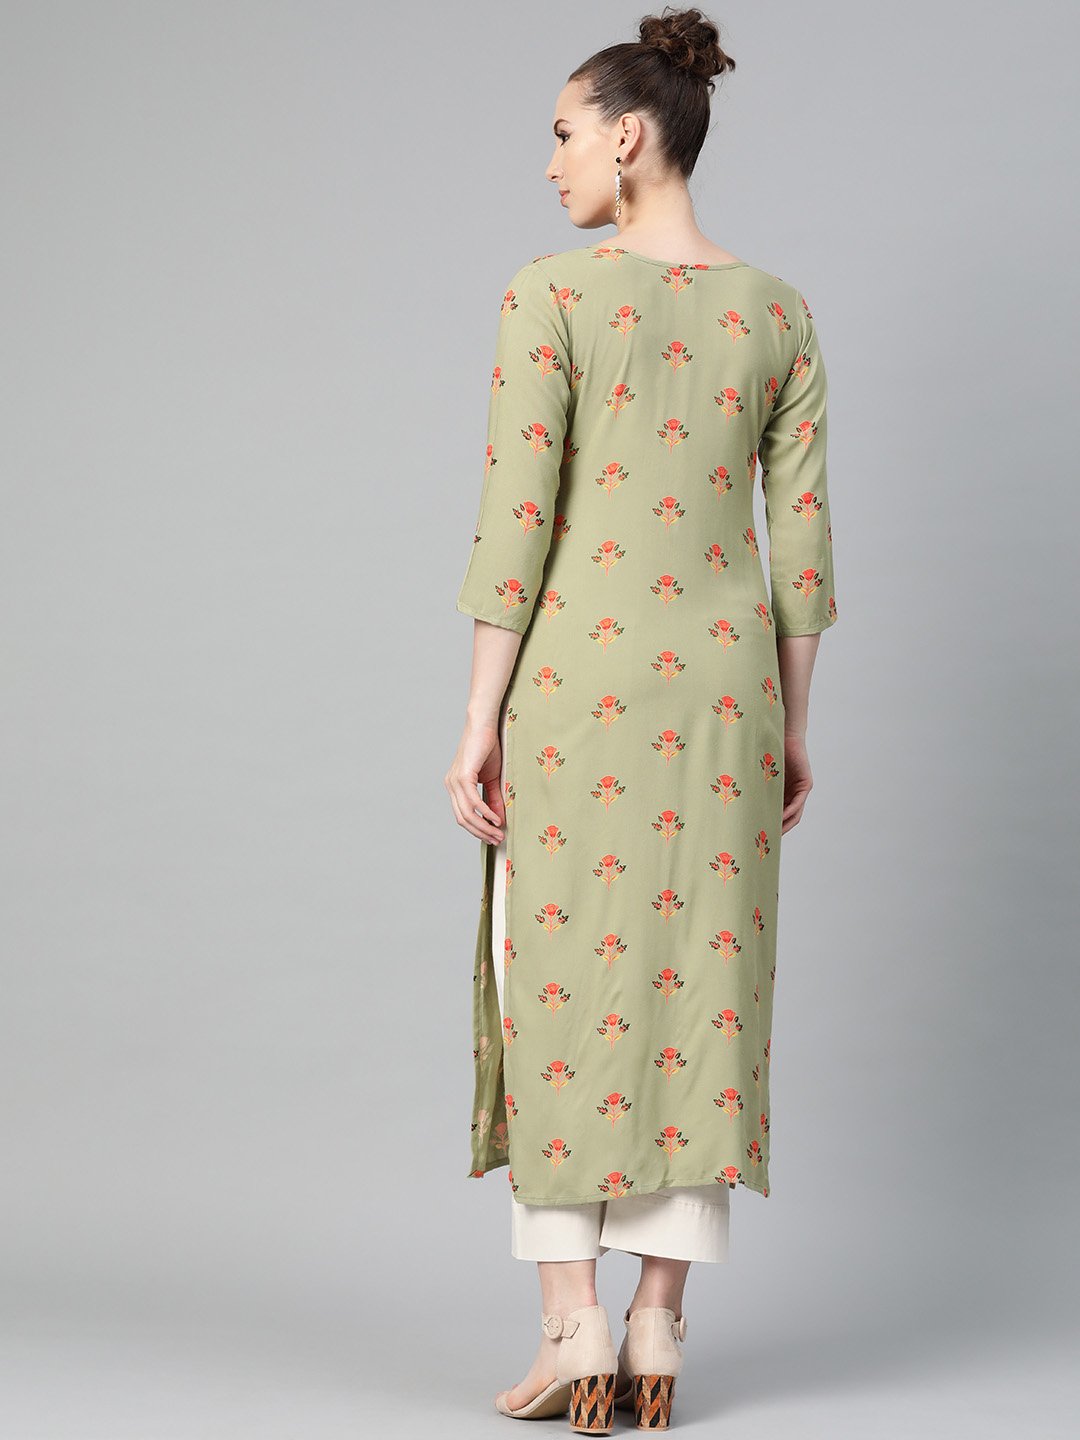 Women's Olive Green Multi Colored Printed Kurta With Round Neck With V & 3/4 Sleeves - Nayo Clothing